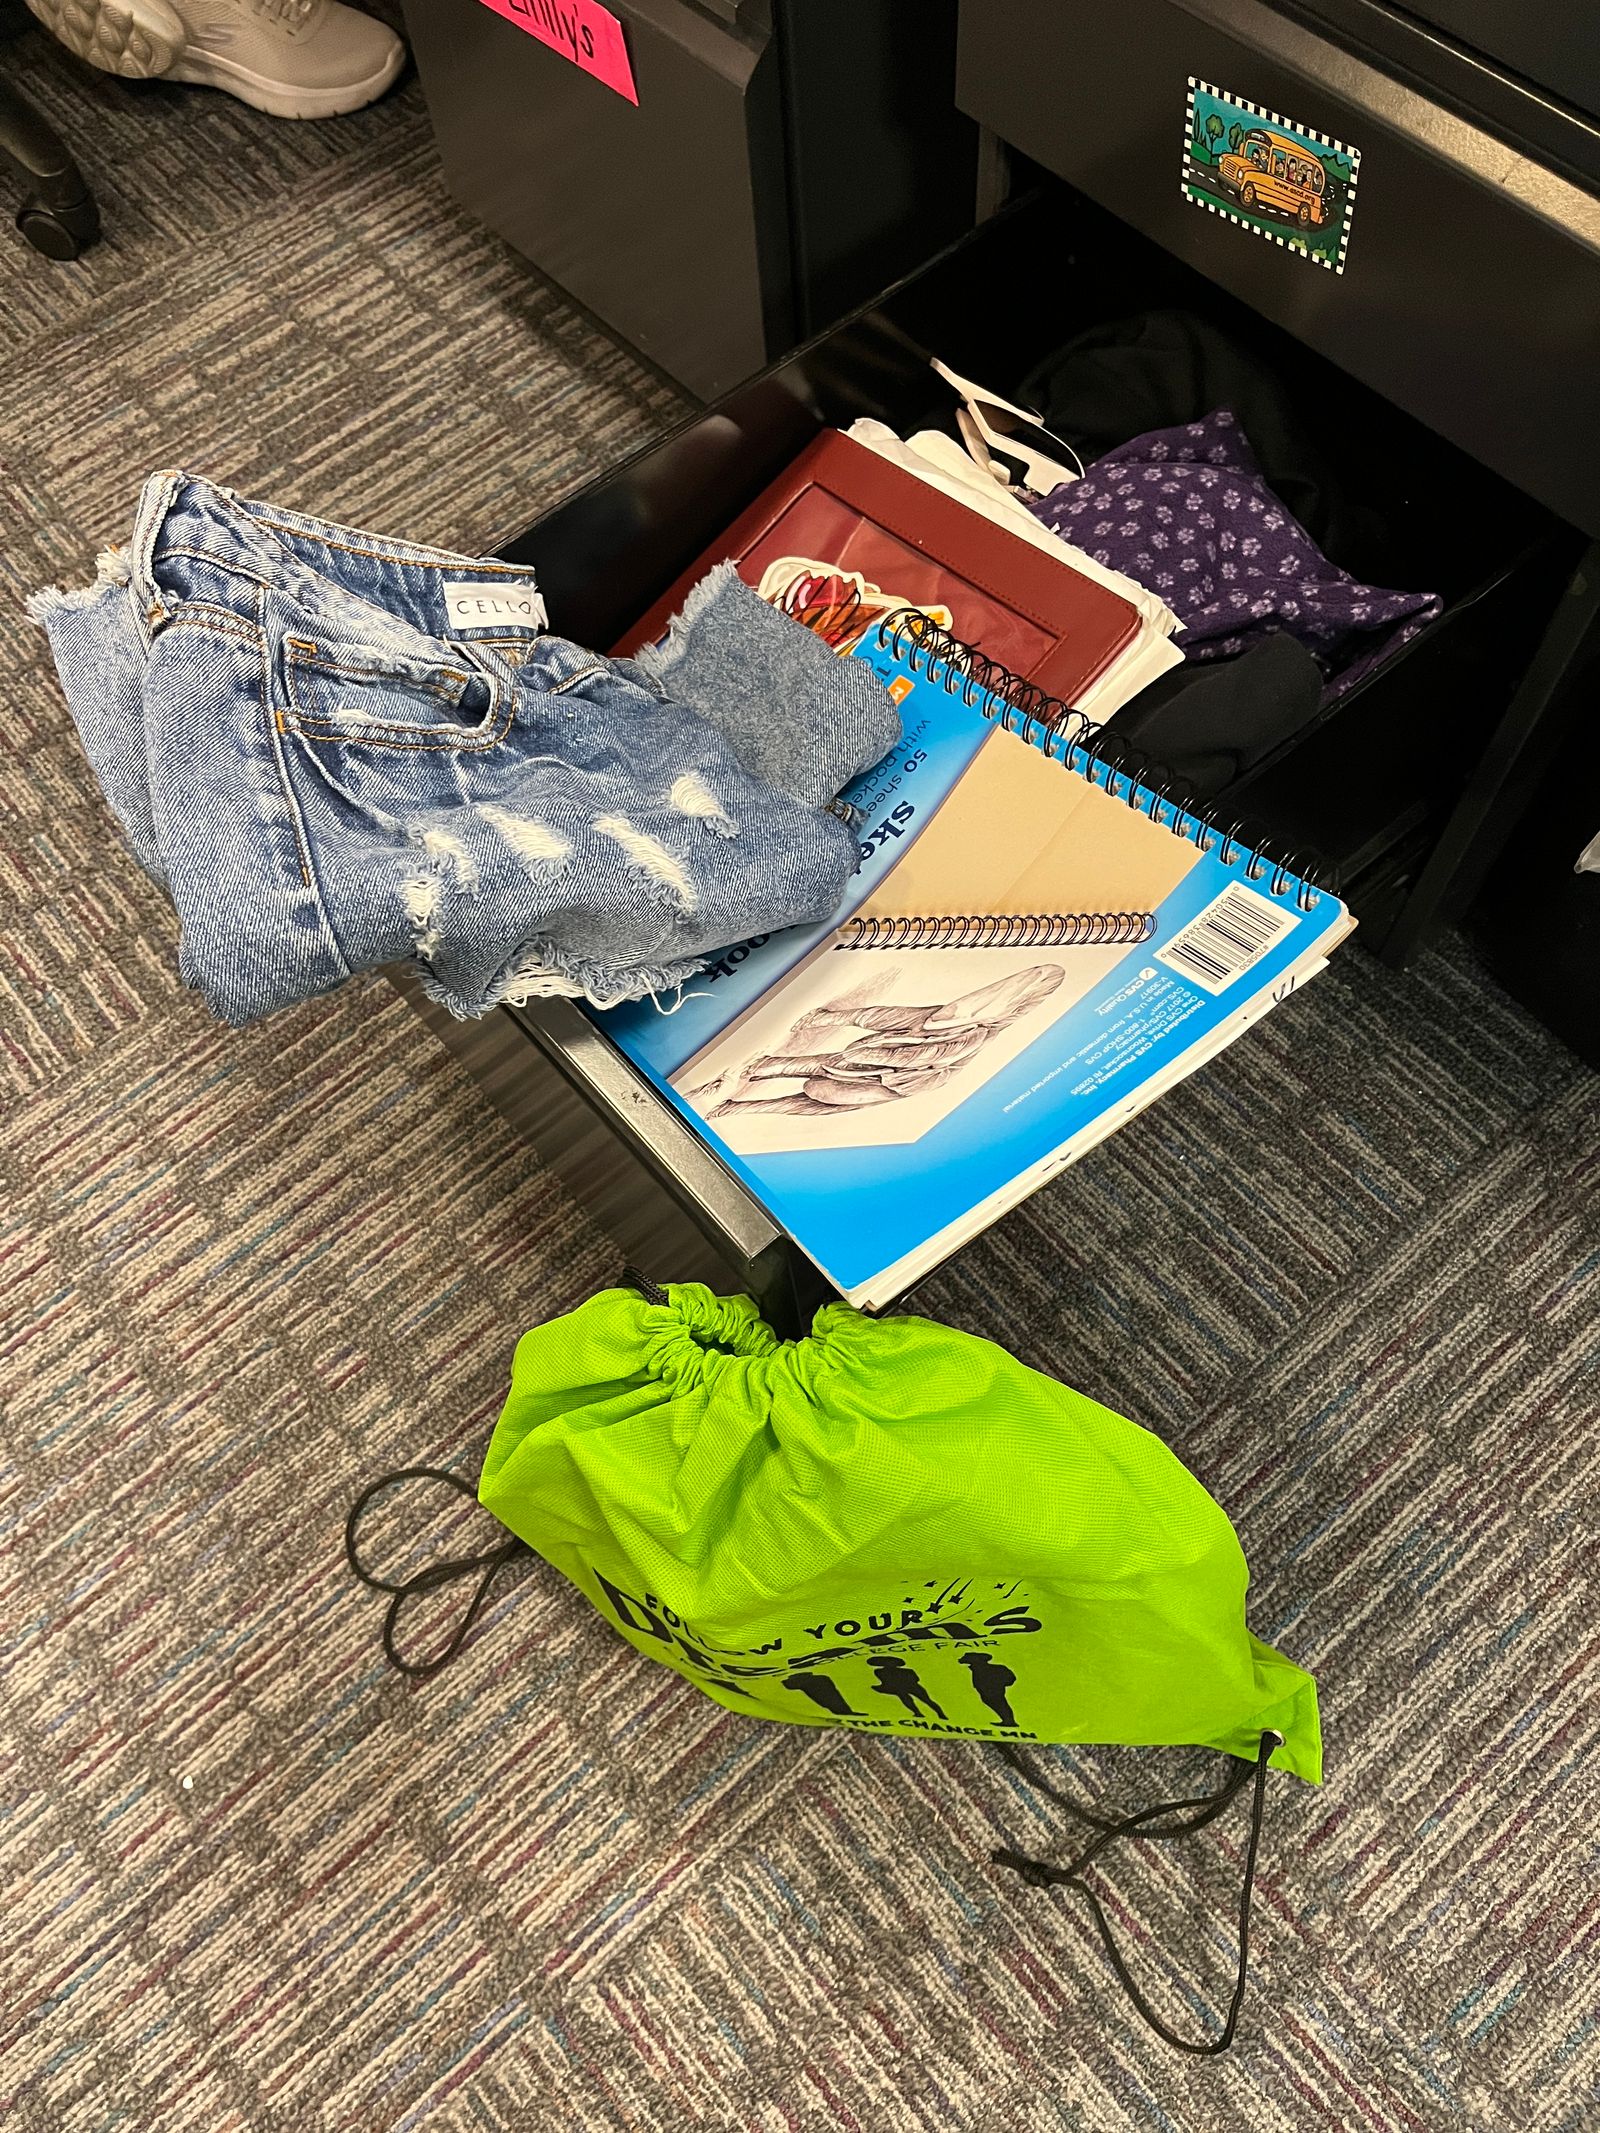 A desk drawer sits open near the floor. in the drawer are pants and notebooks. Next to the drawer on the floor is a neon green drawstring bag.